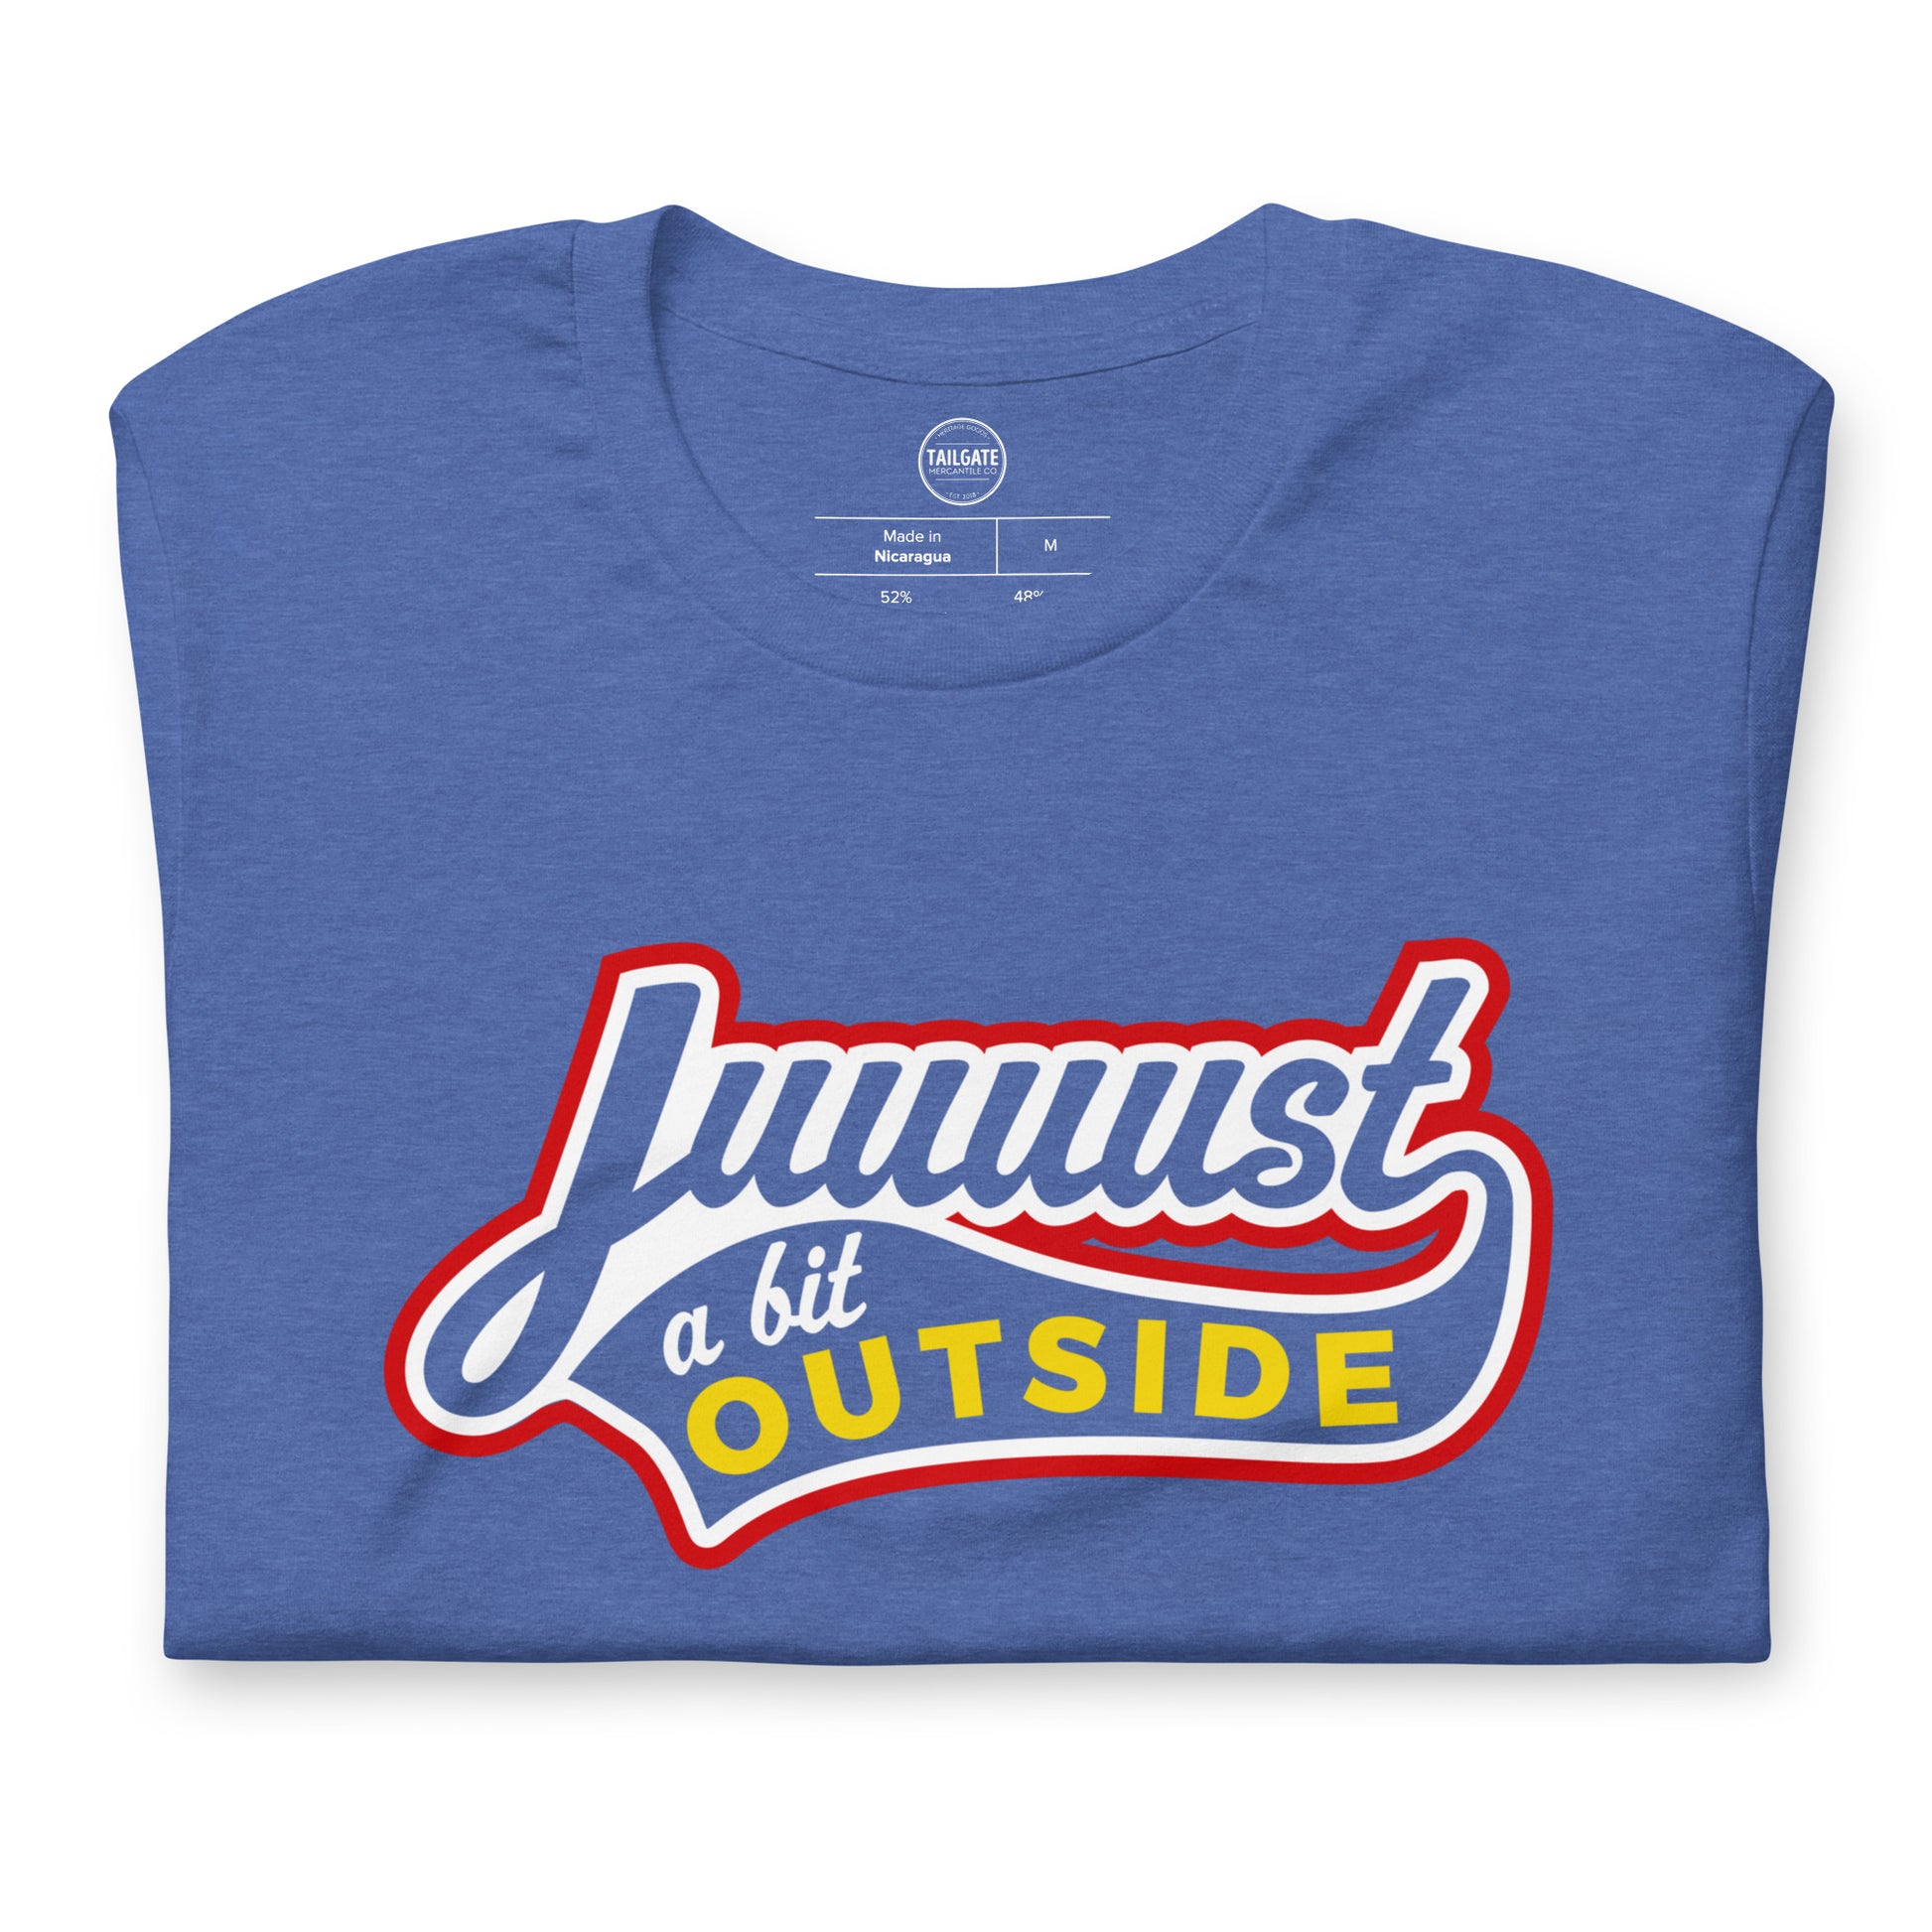 Close up image of heather royal blue t-shirt with design of "Juuuust a bit Outside" in white/red/yellow located on centre chest. Just a Bit Outside is an homage to the great baseball movie "Major League". Image includes neck tag details. This design is exclusive to Tailgate Mercantile and available only online.